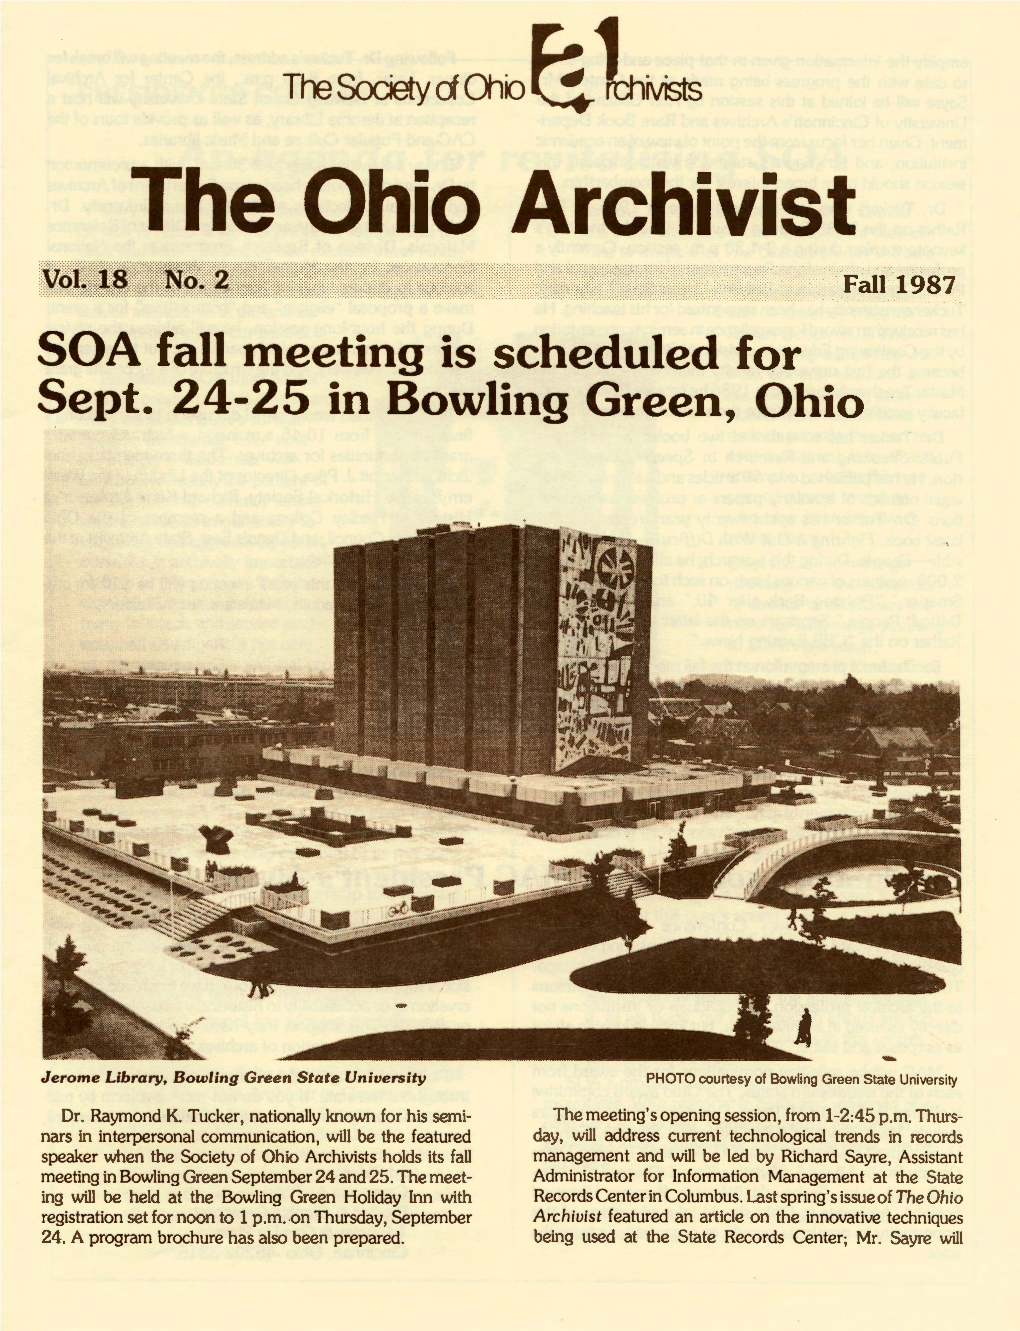 The Ohio Archivist Fall 1987 SOA Fall Meeting Is Scheduled for Sept